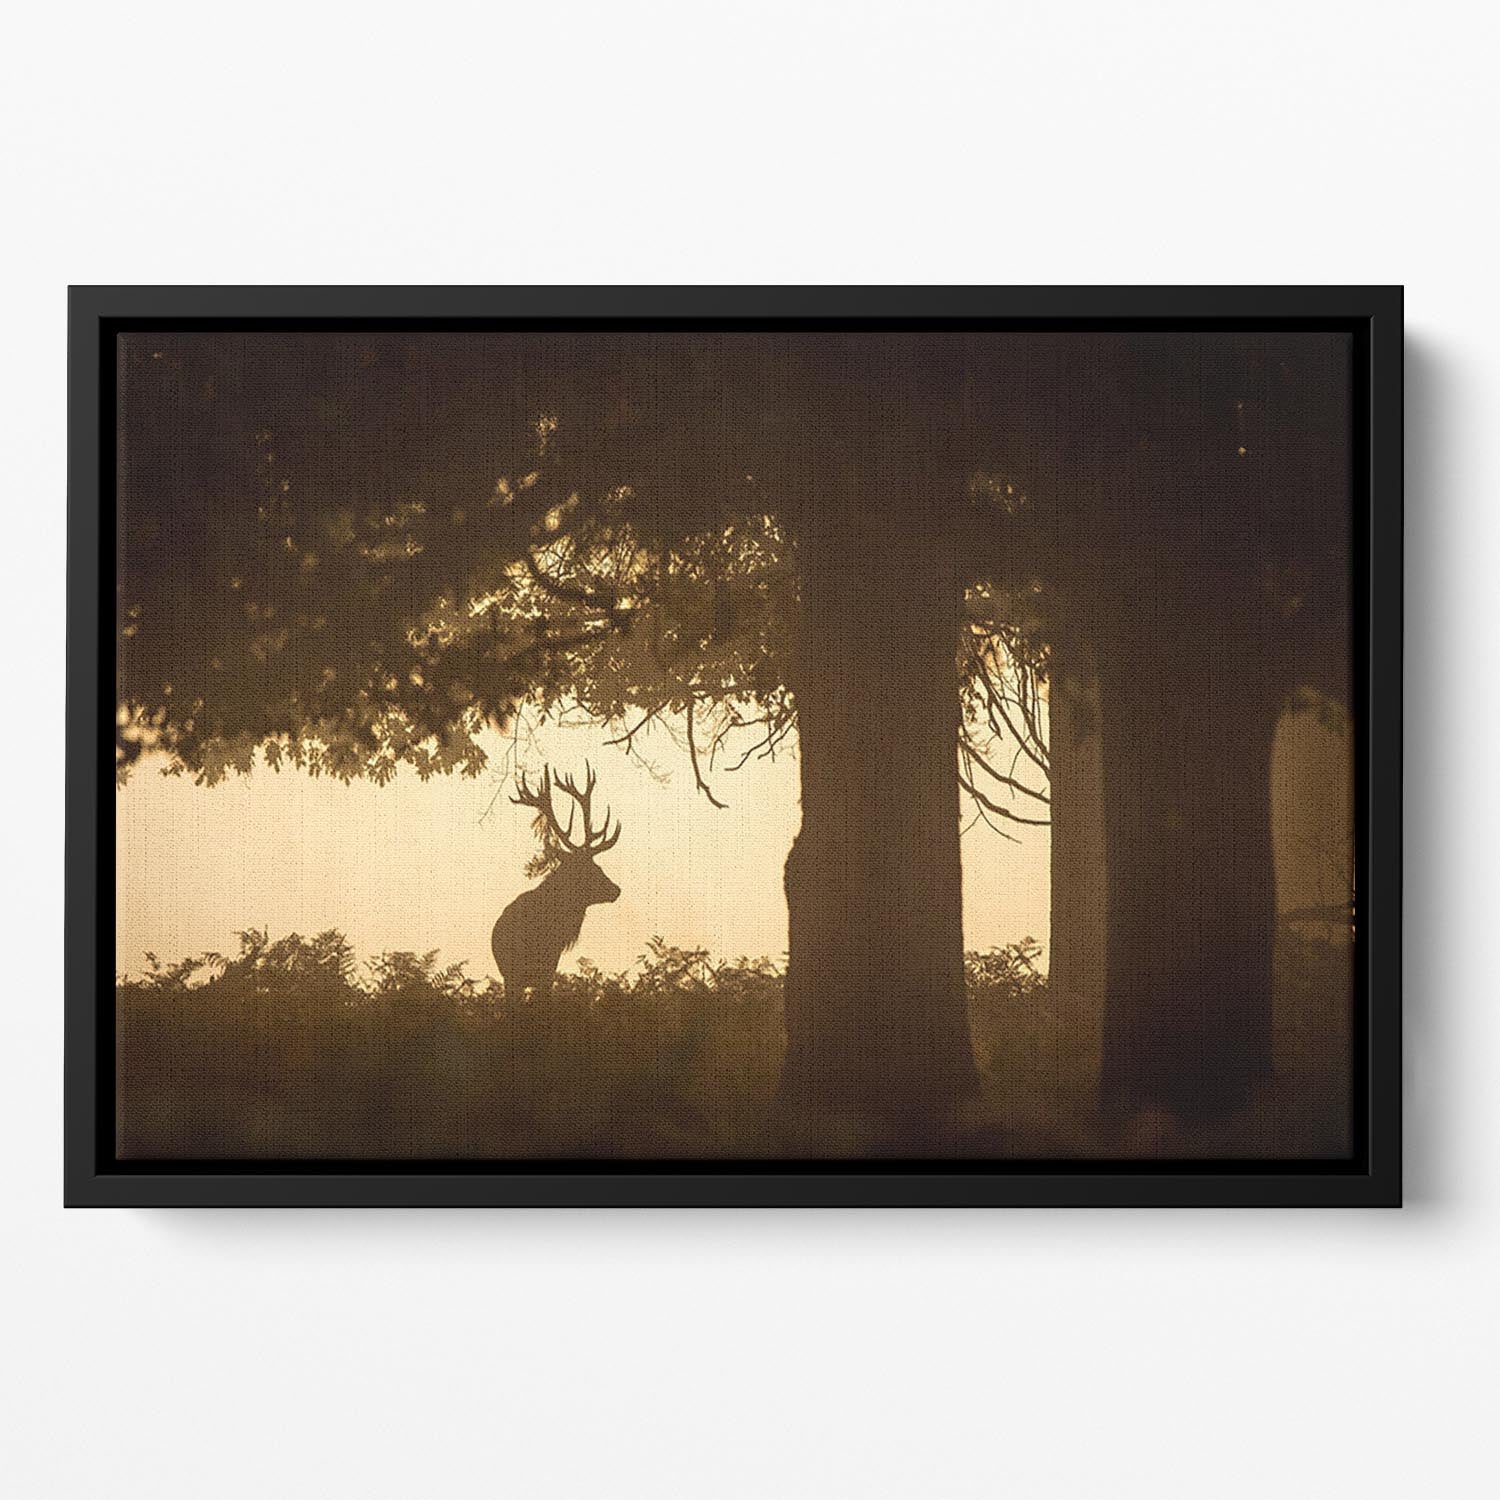 Red deer stag silhouette in forest Floating Framed Canvas - Canvas Art Rocks - 2